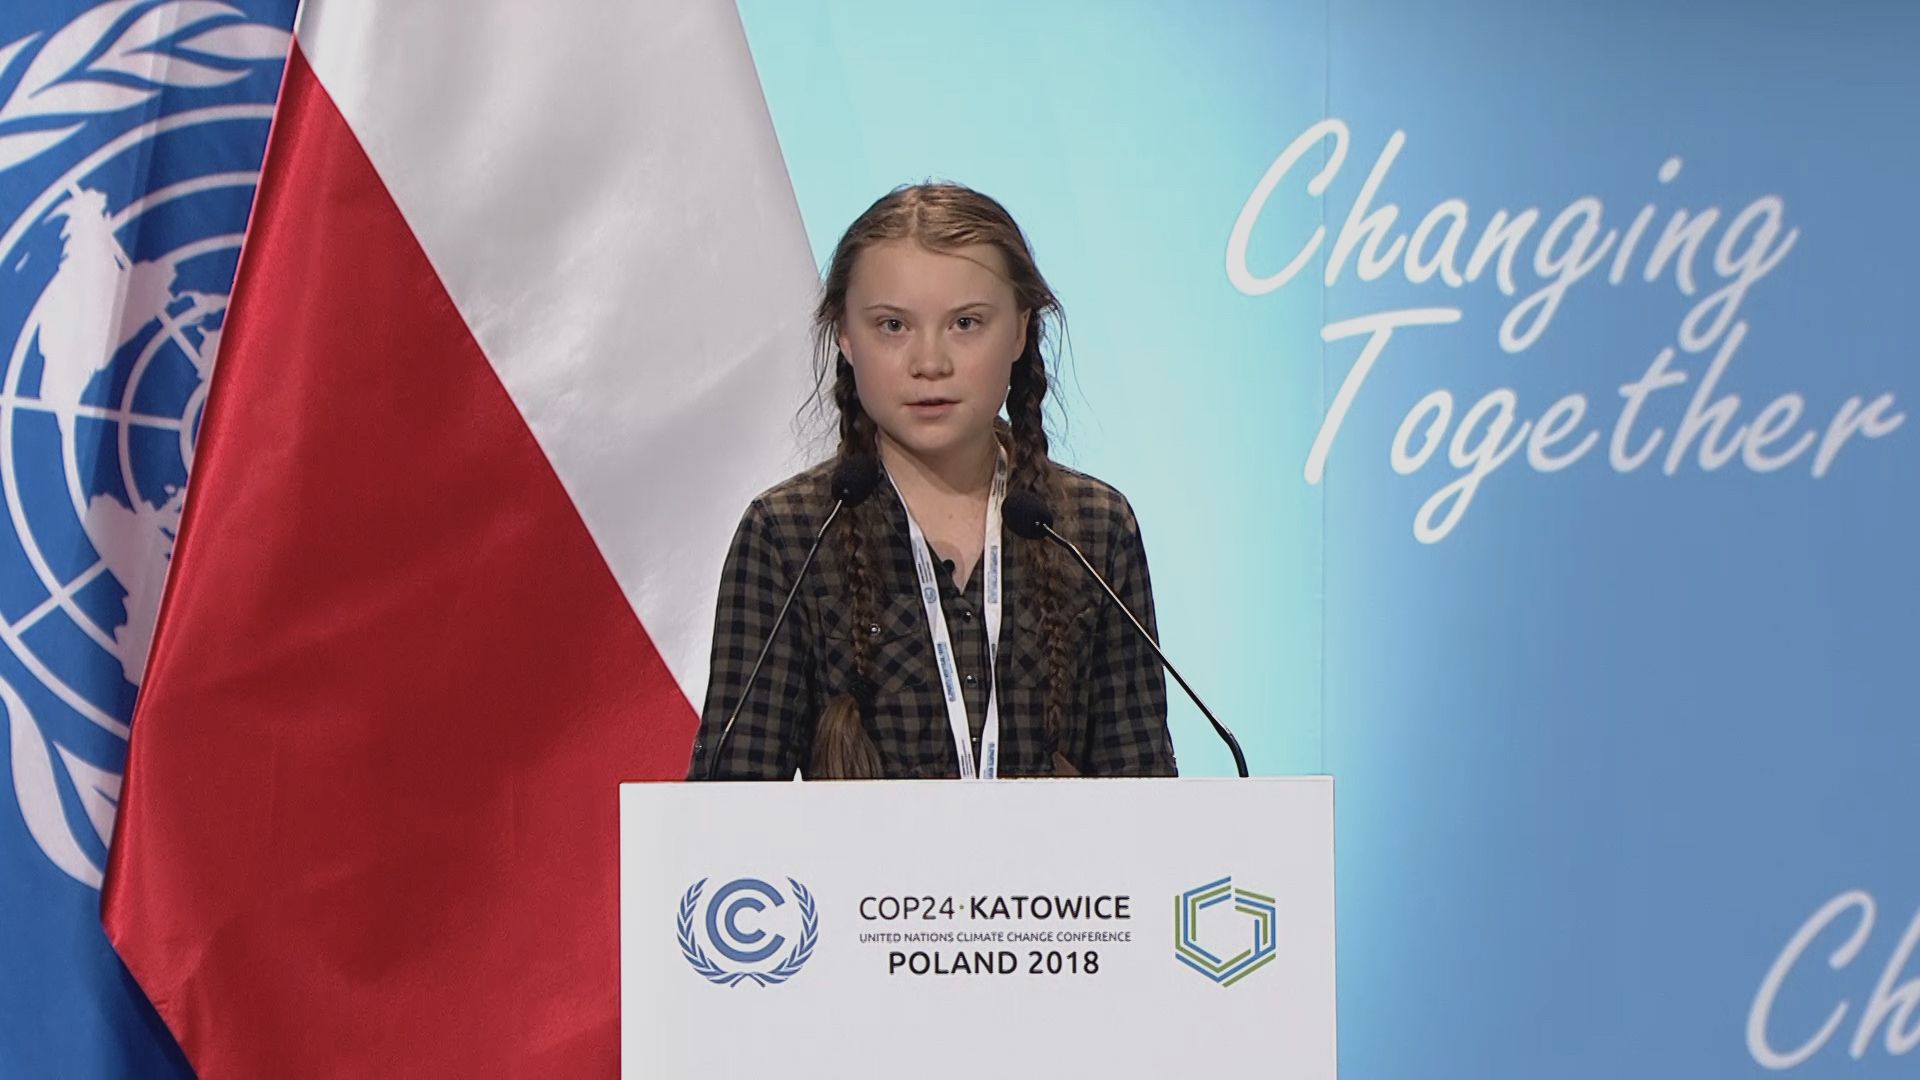 Greta Thunberg is speaking at a podium at the UN COP24 in Poland